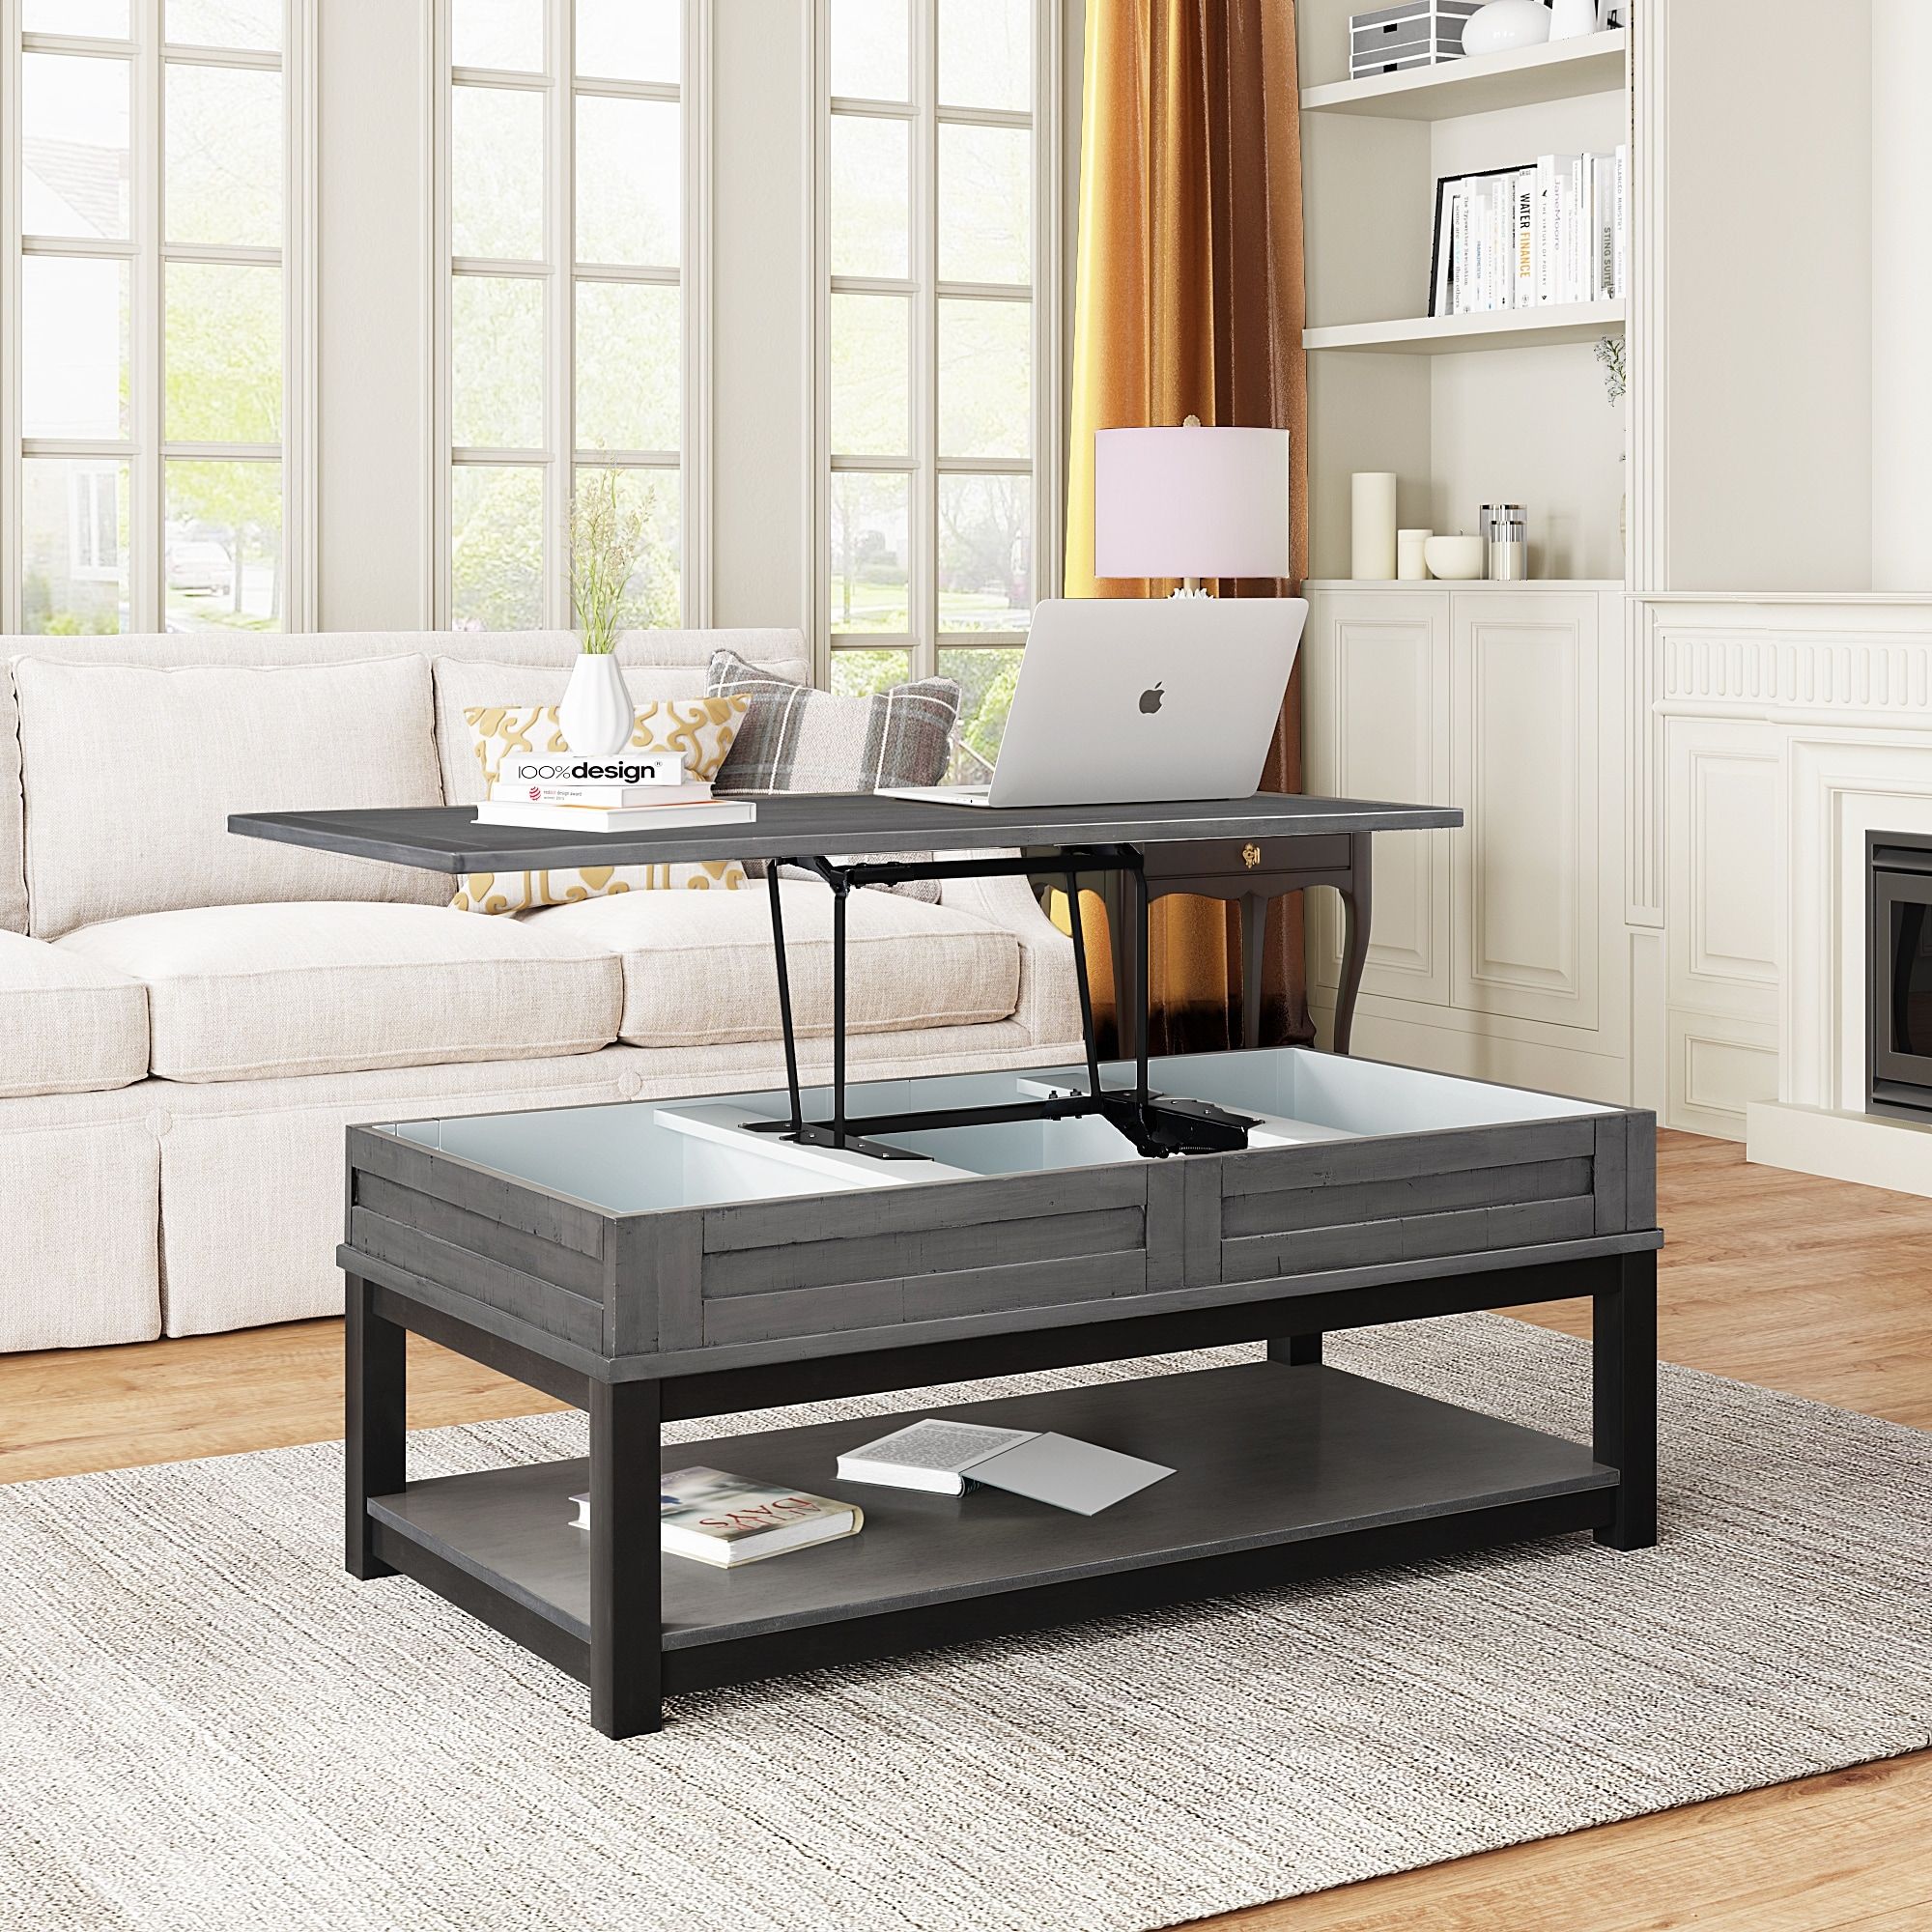 Lift Top Coffee Table With Inner Storage Space & Shelf, Modern Simple  Exquisite End Tables For Living Room, Bedroom – On Sale – Bed Bath & Beyond  – 37277080 With Lift Top Coffee Tables With Storage (View 10 of 15)